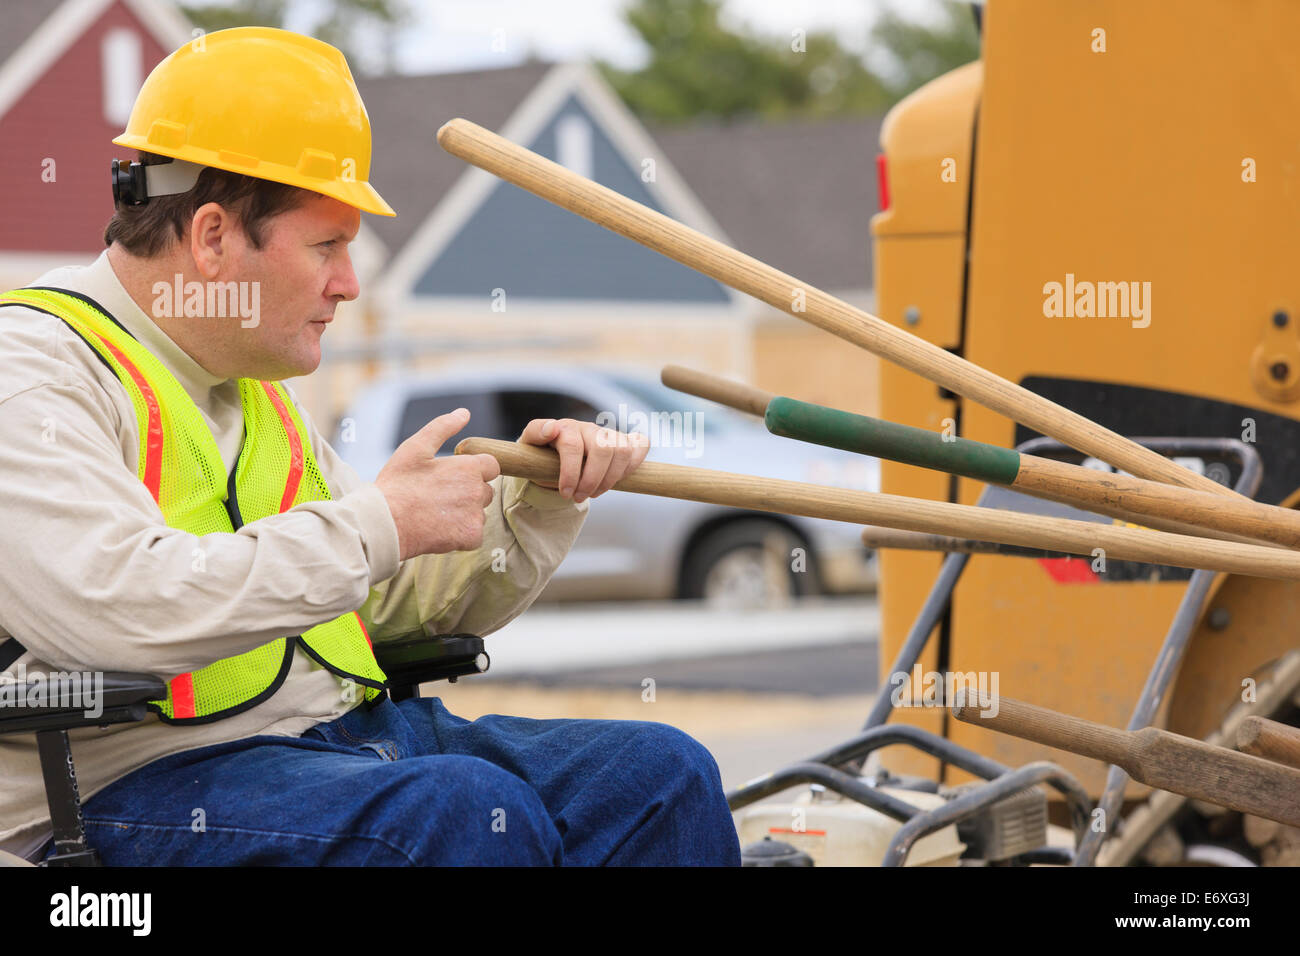 Construction supervisor with Spinal Cord Injury counting work tools on construction site Stock Photo